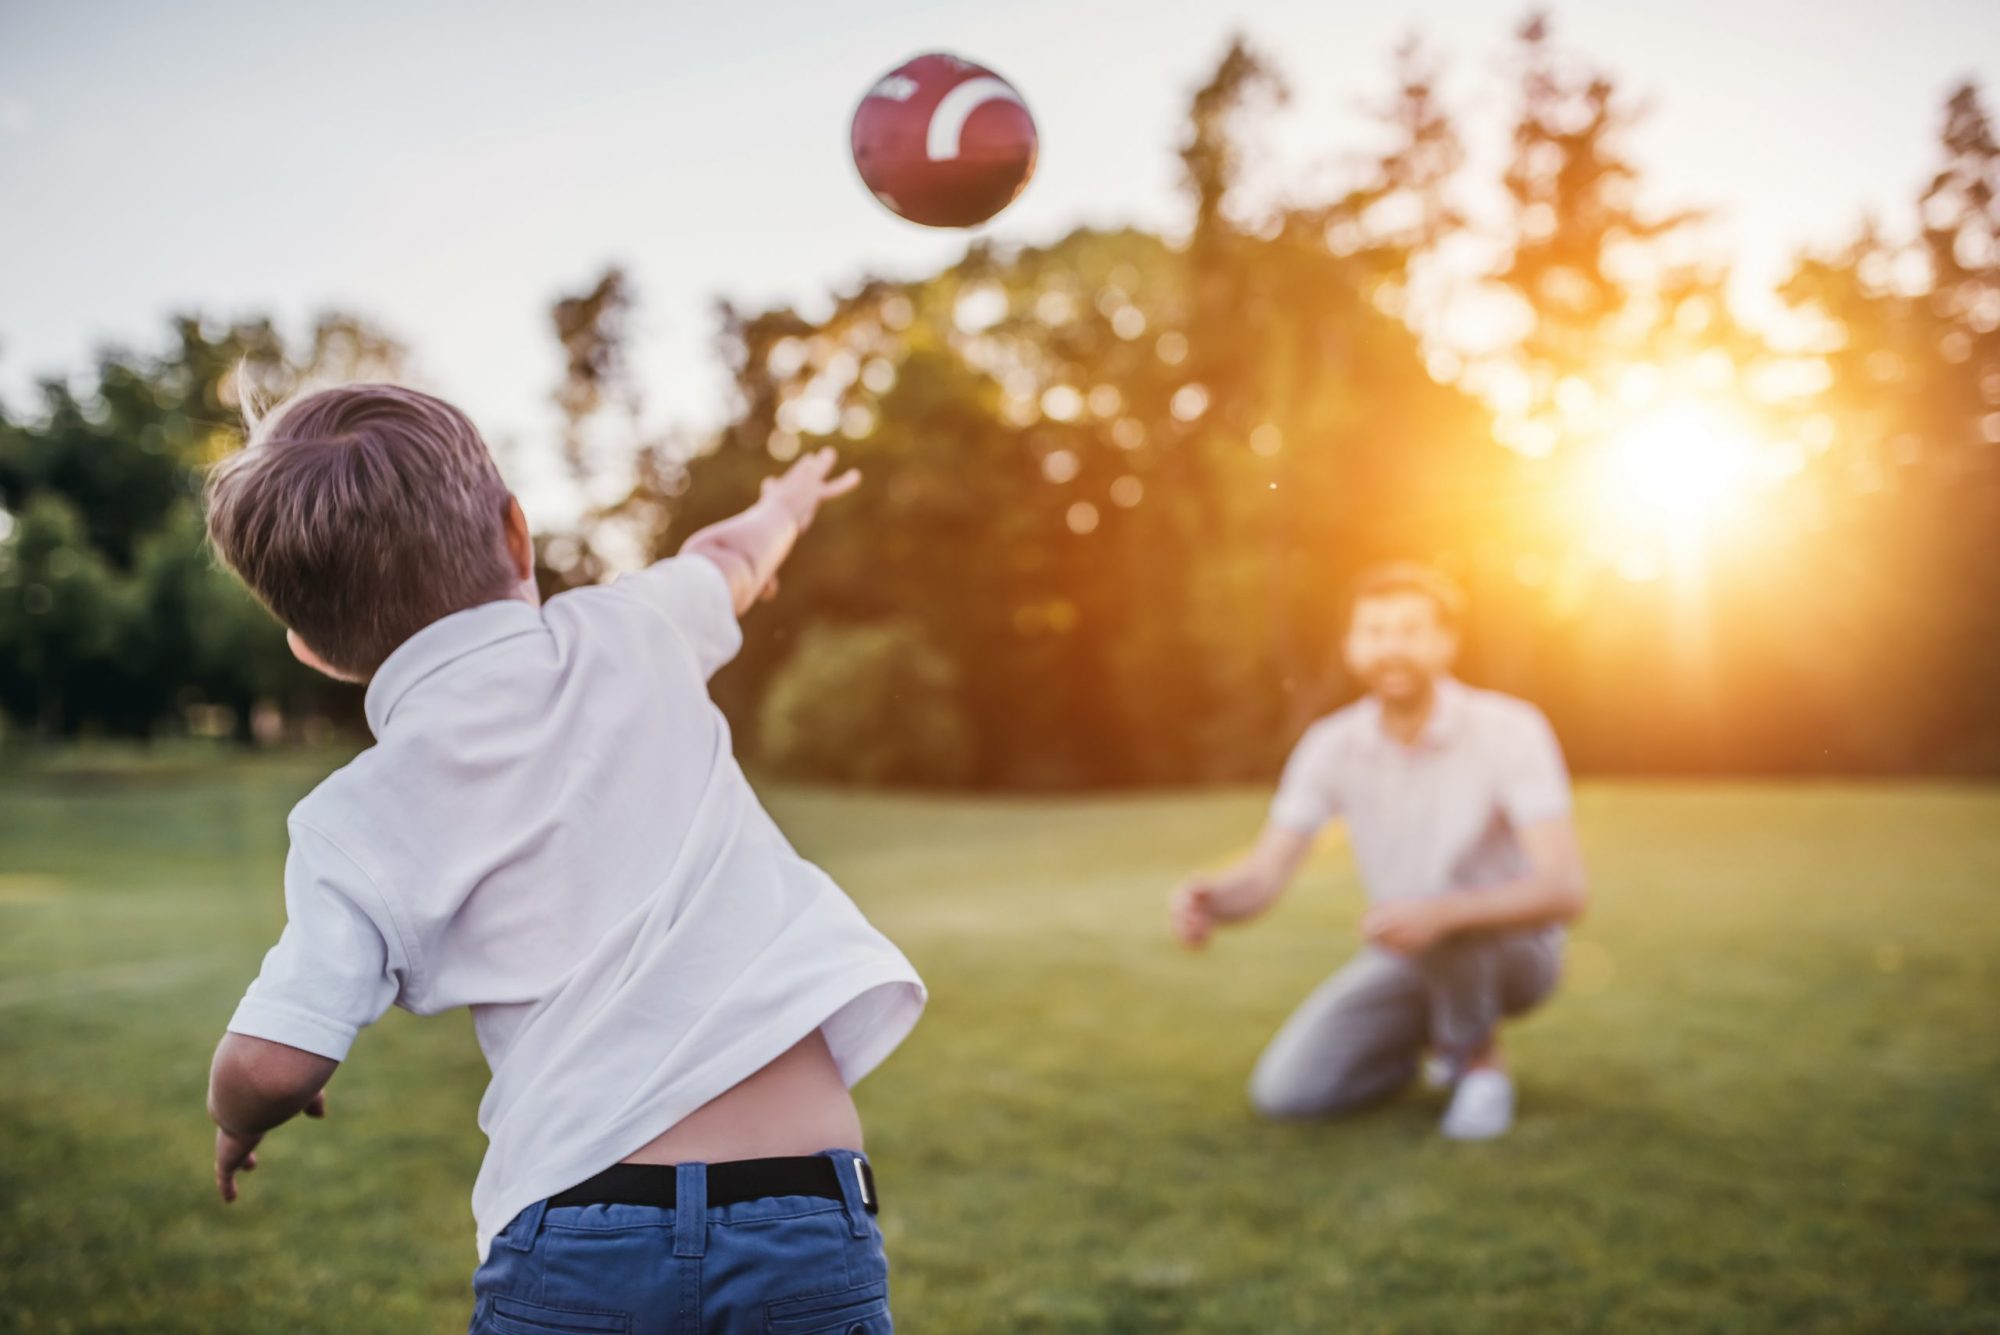 A boy playing catch with football with dad, a Chicago parenting plan attorney can assist with any custody issues.